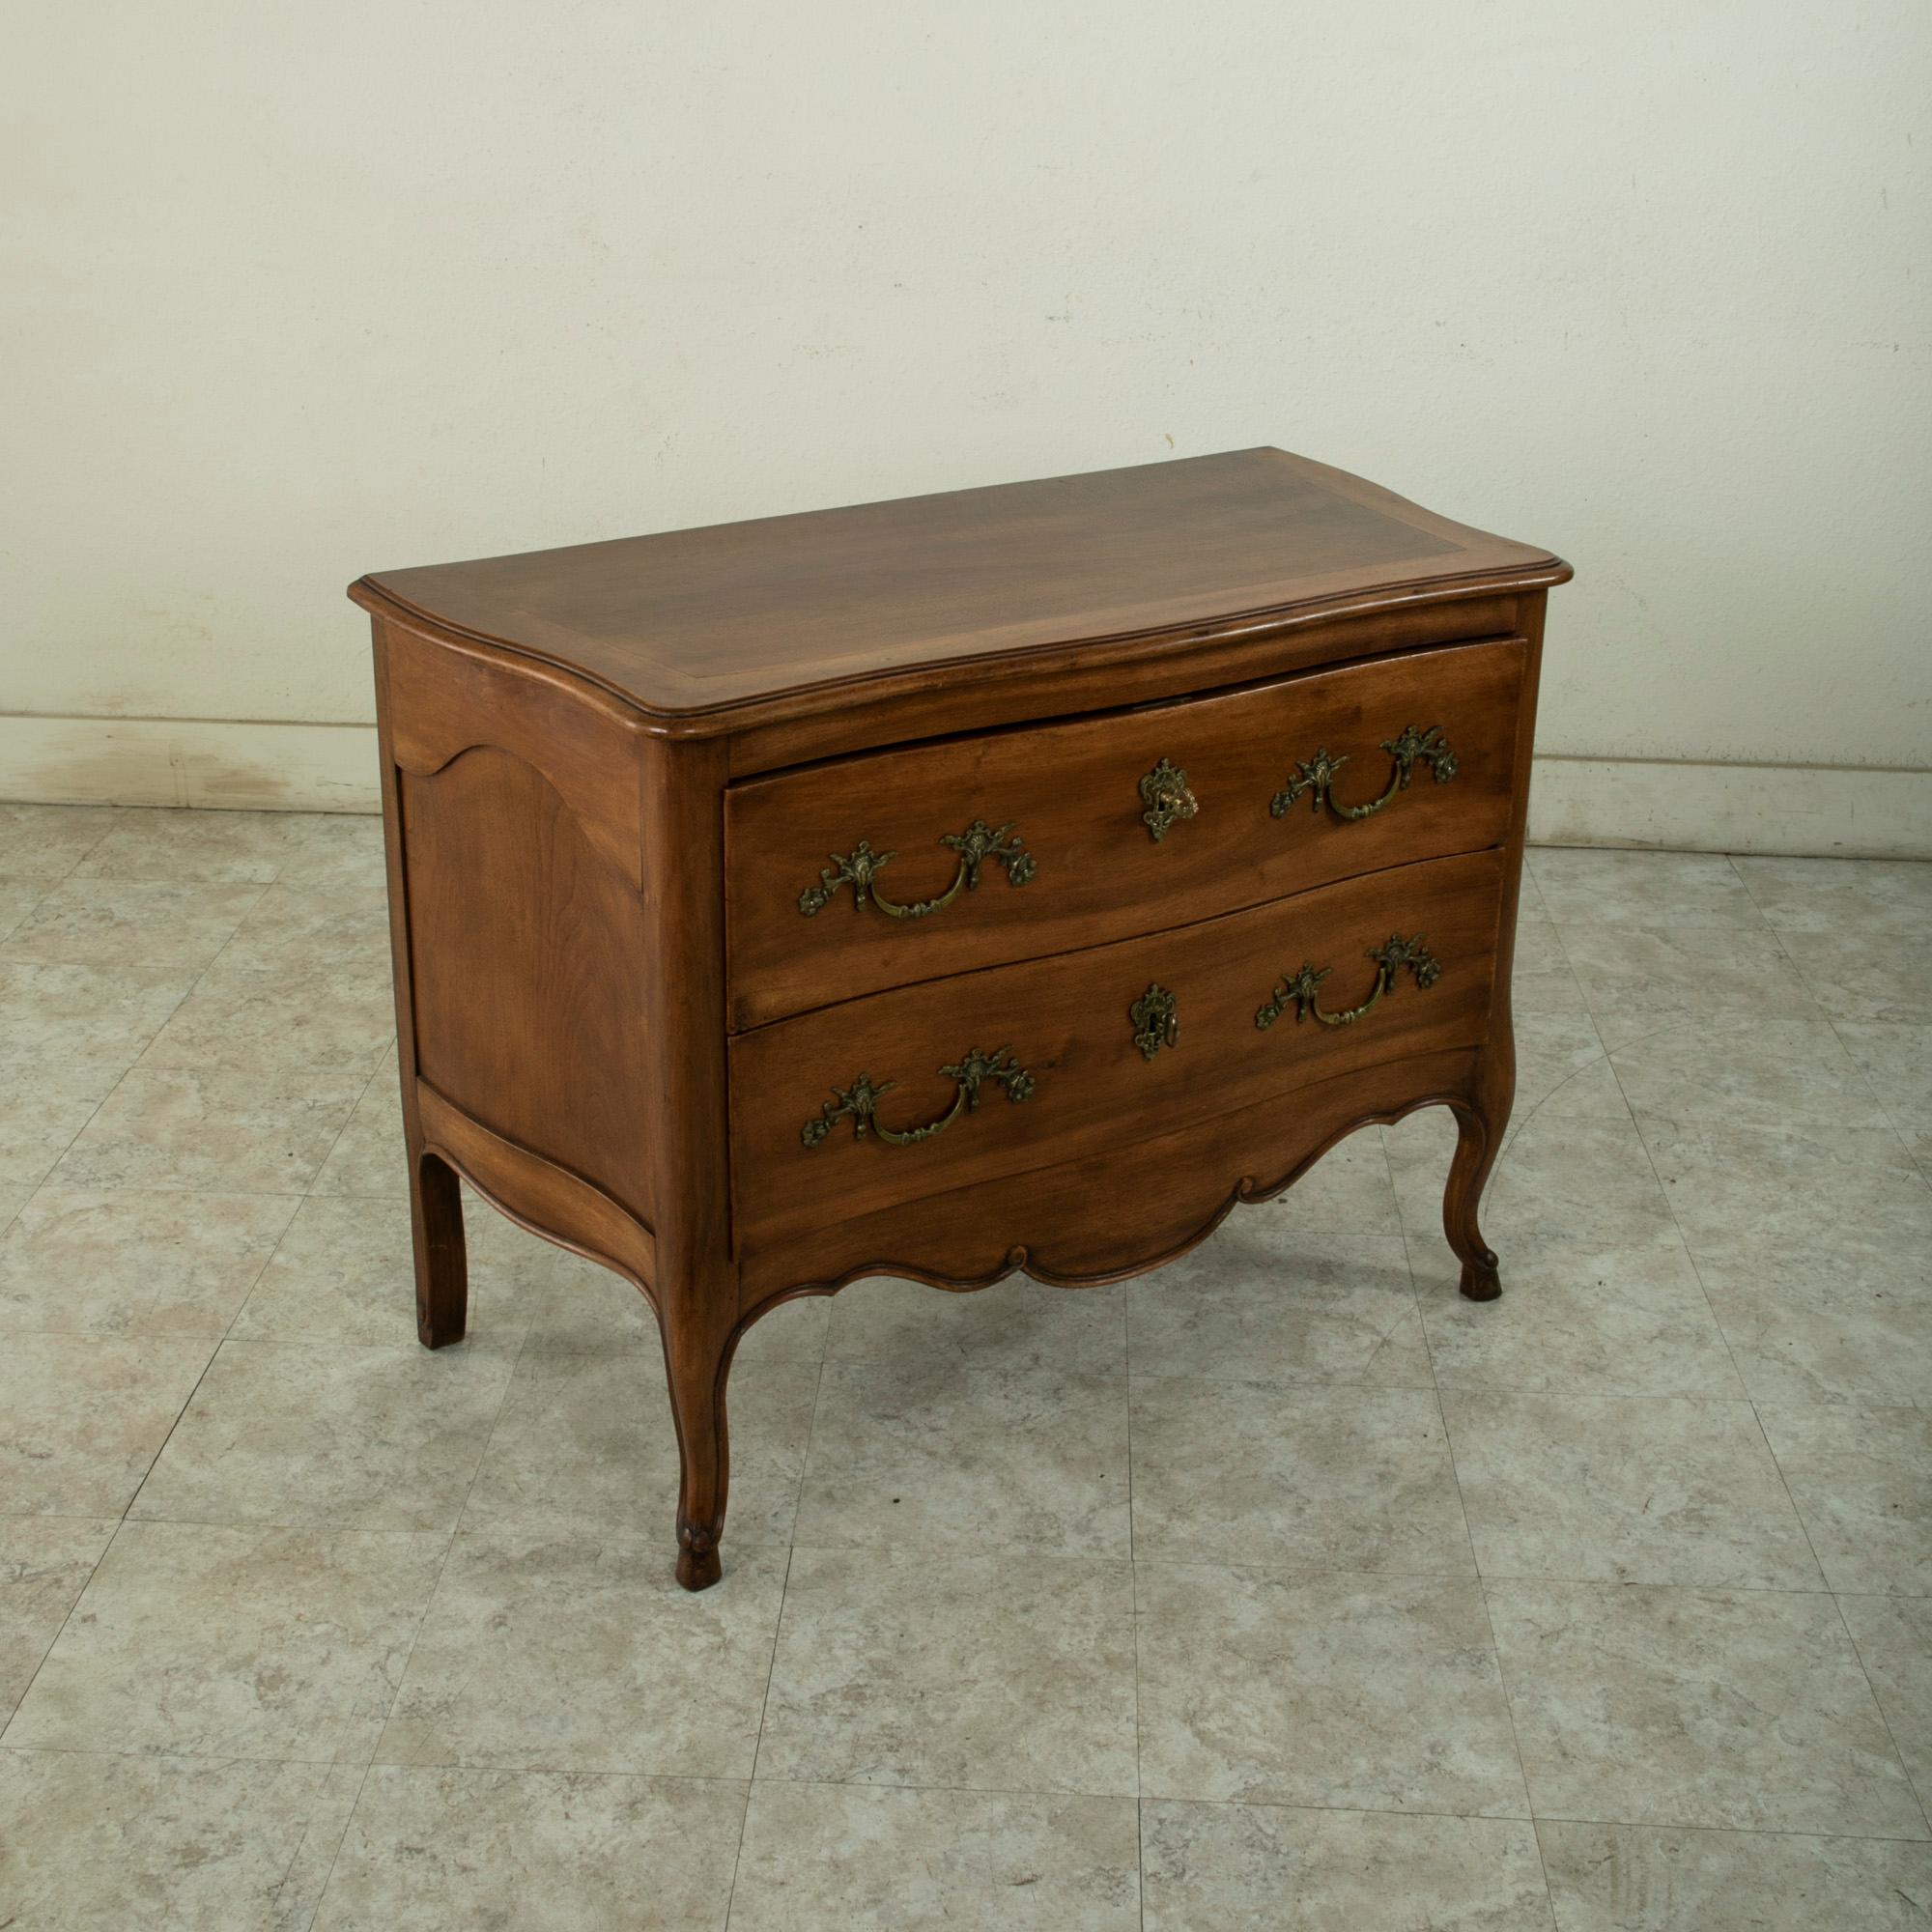 Early 20th Century French Louis XV Style Walnut Commode Sauteuse or Chest In Good Condition For Sale In Fayetteville, AR